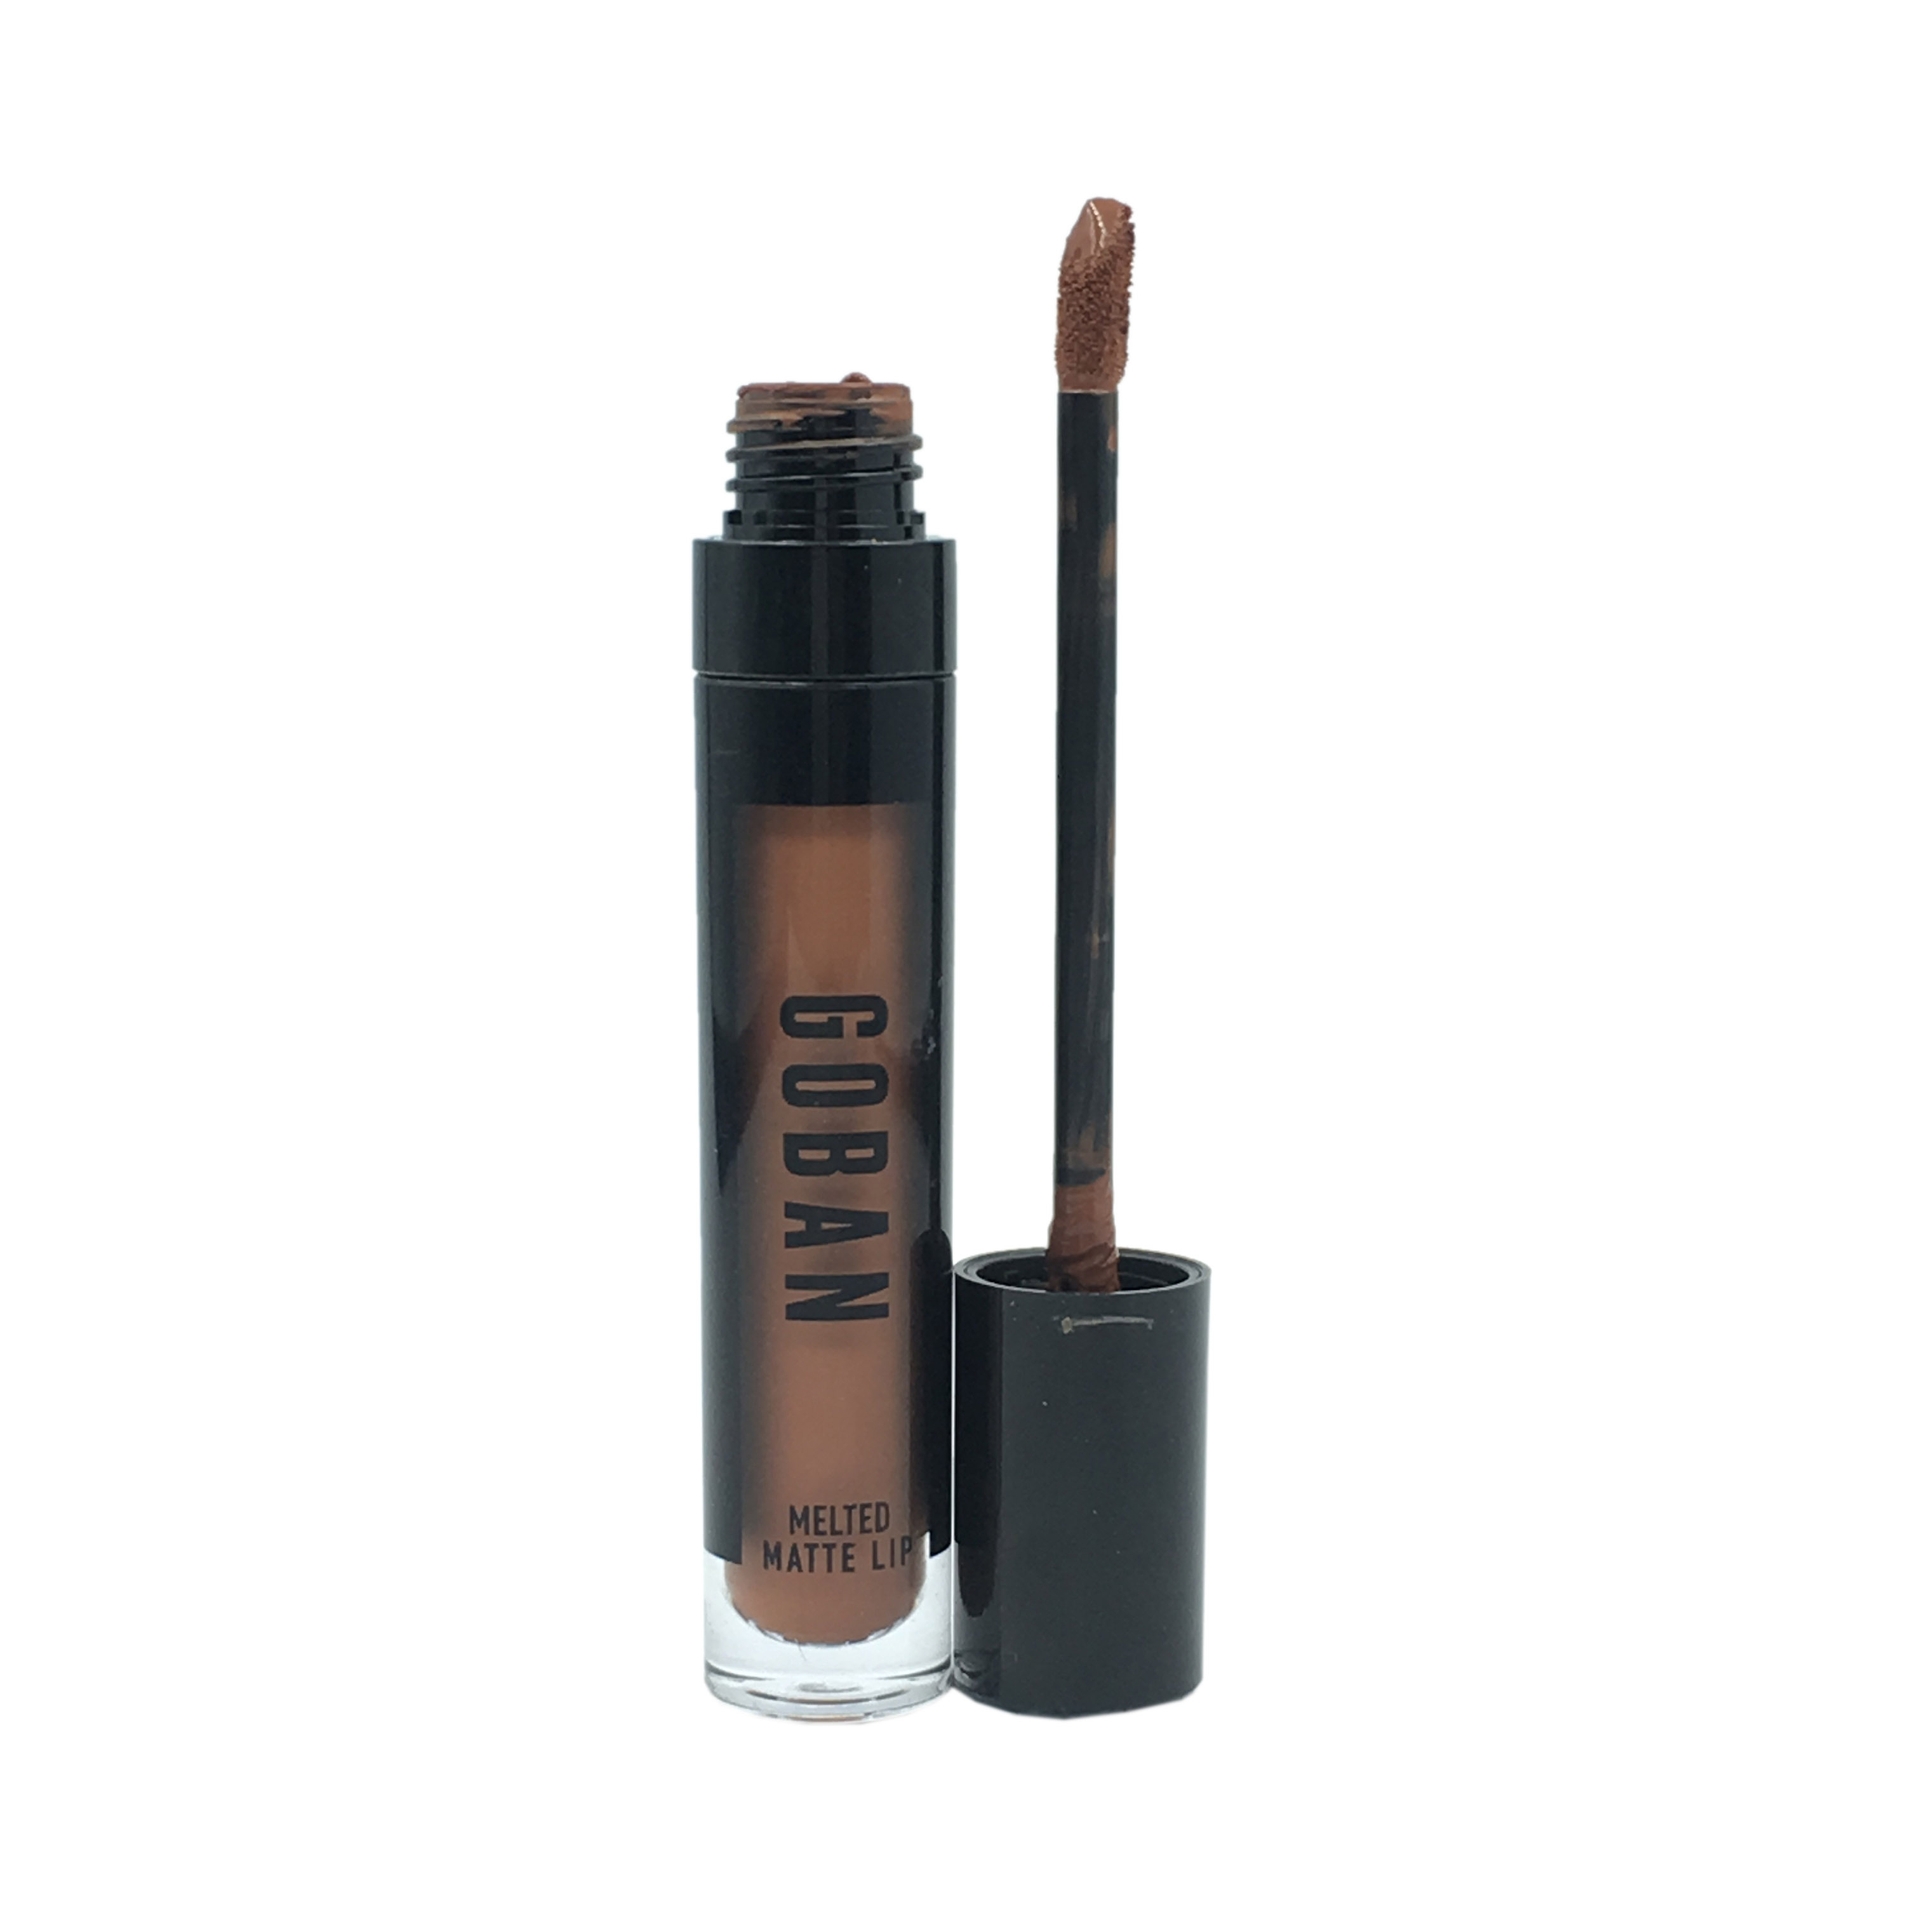 Goban Teddy Brown Melted Matte Lips